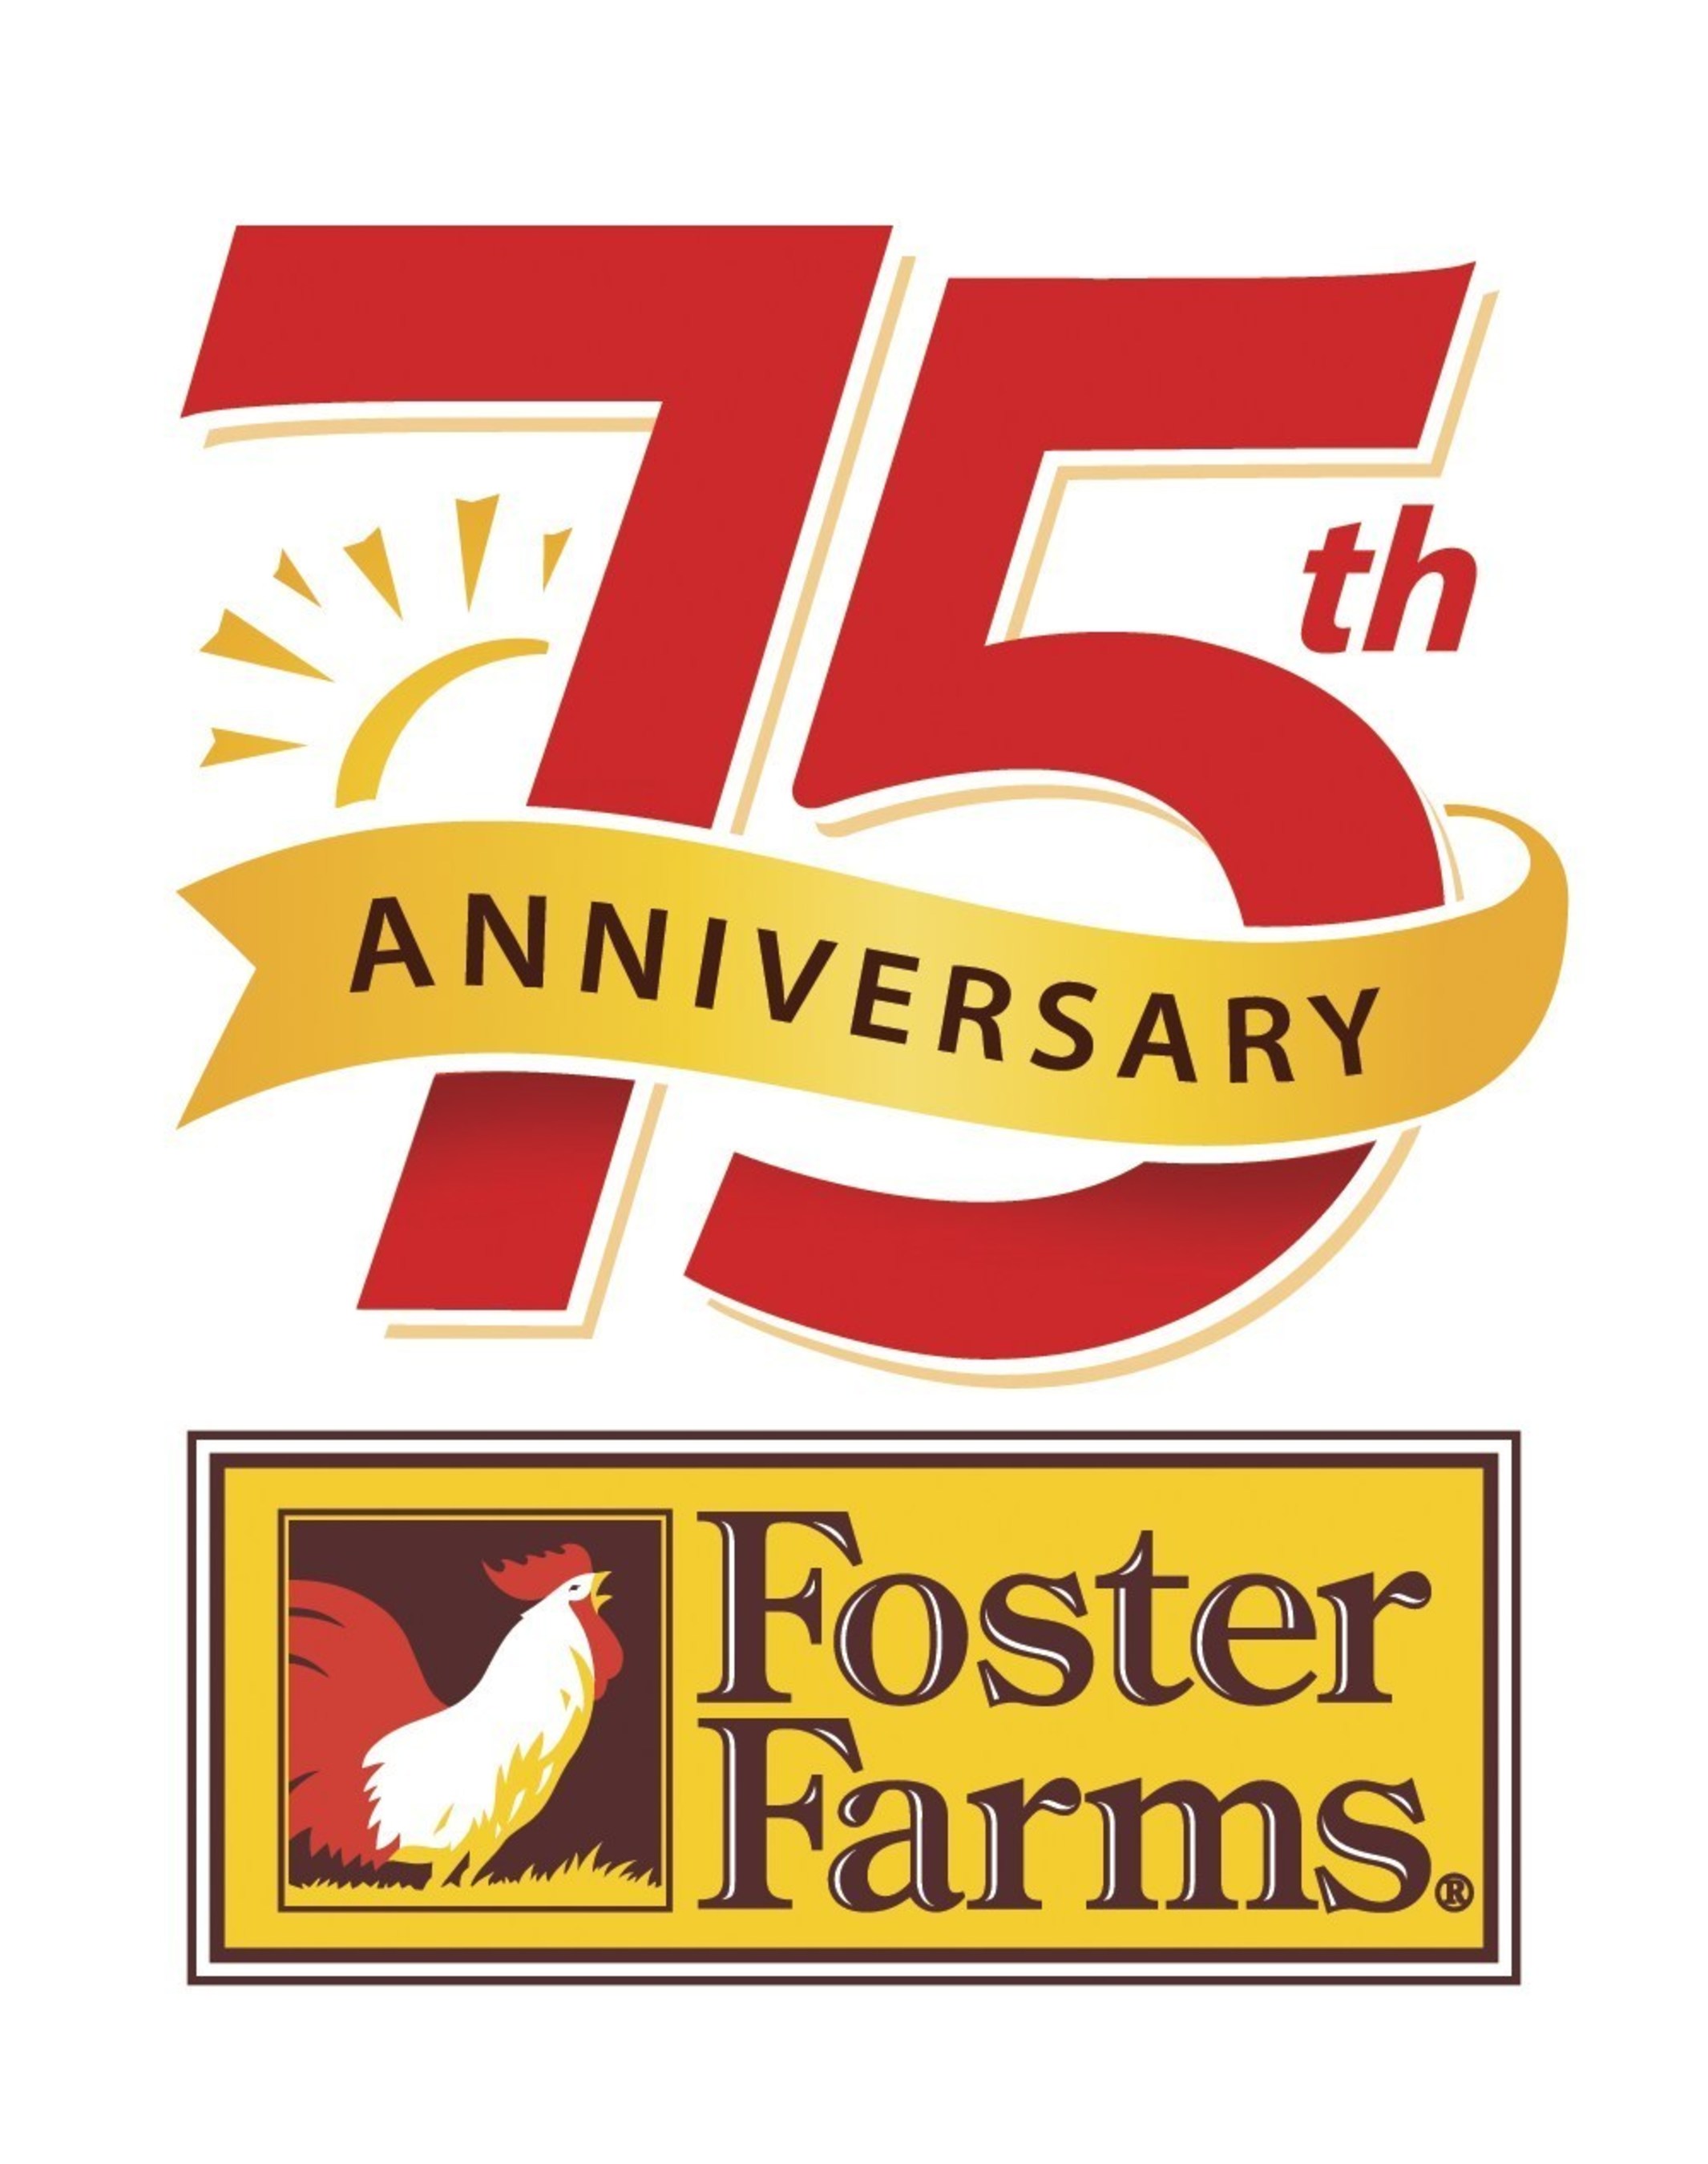 Foster Farms Celebrates 75 Years